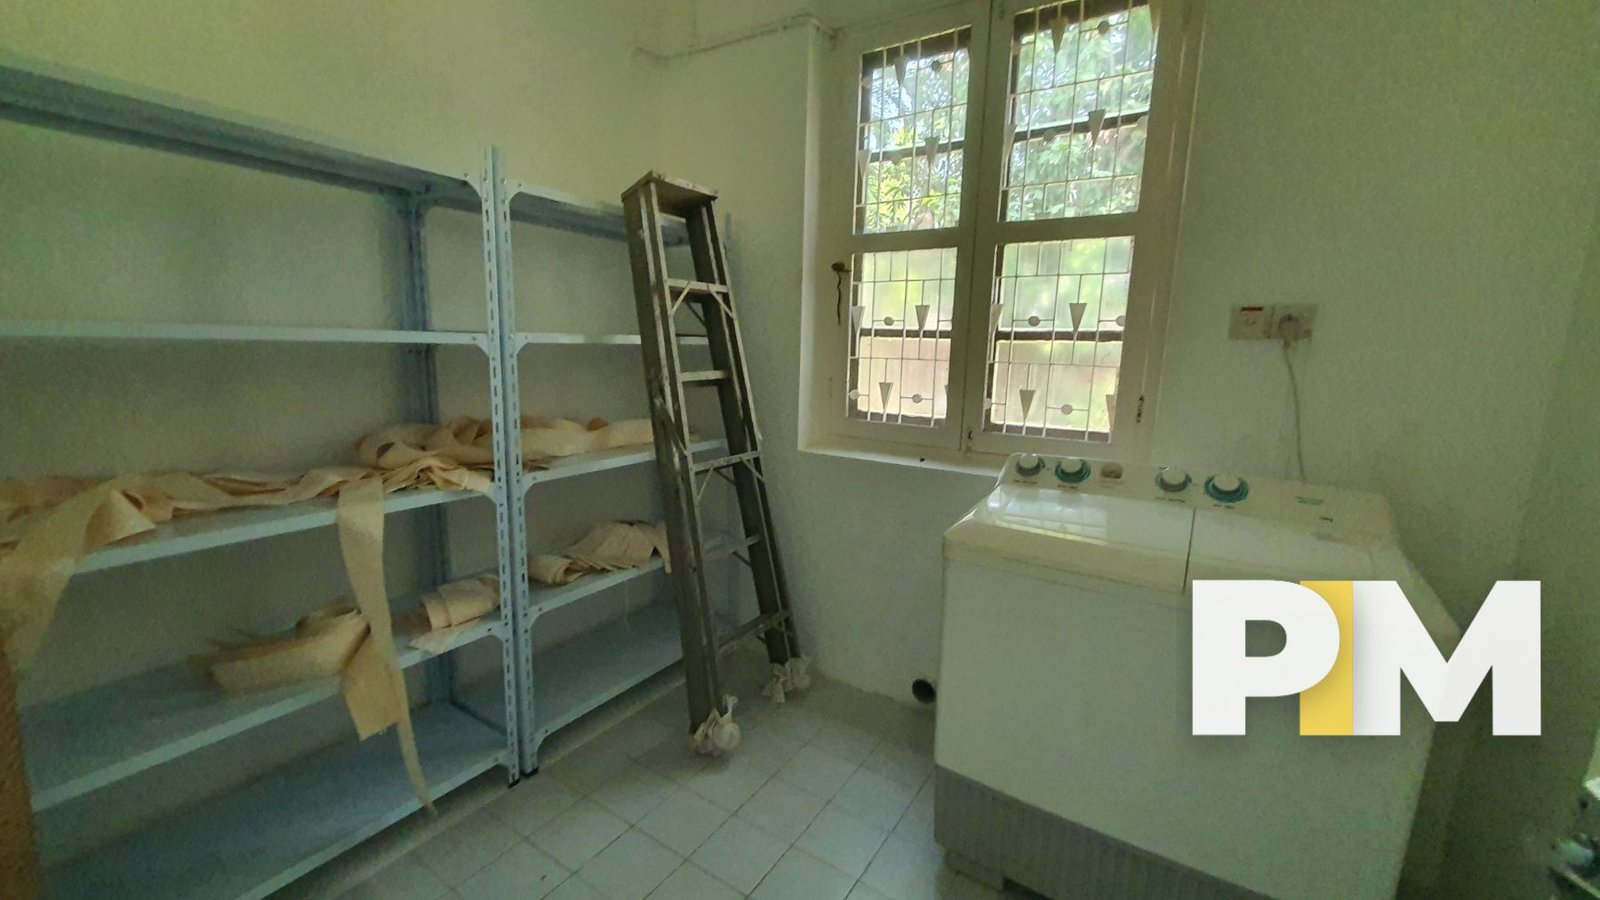 Room with shelf and washing machine - Property in Myanmar